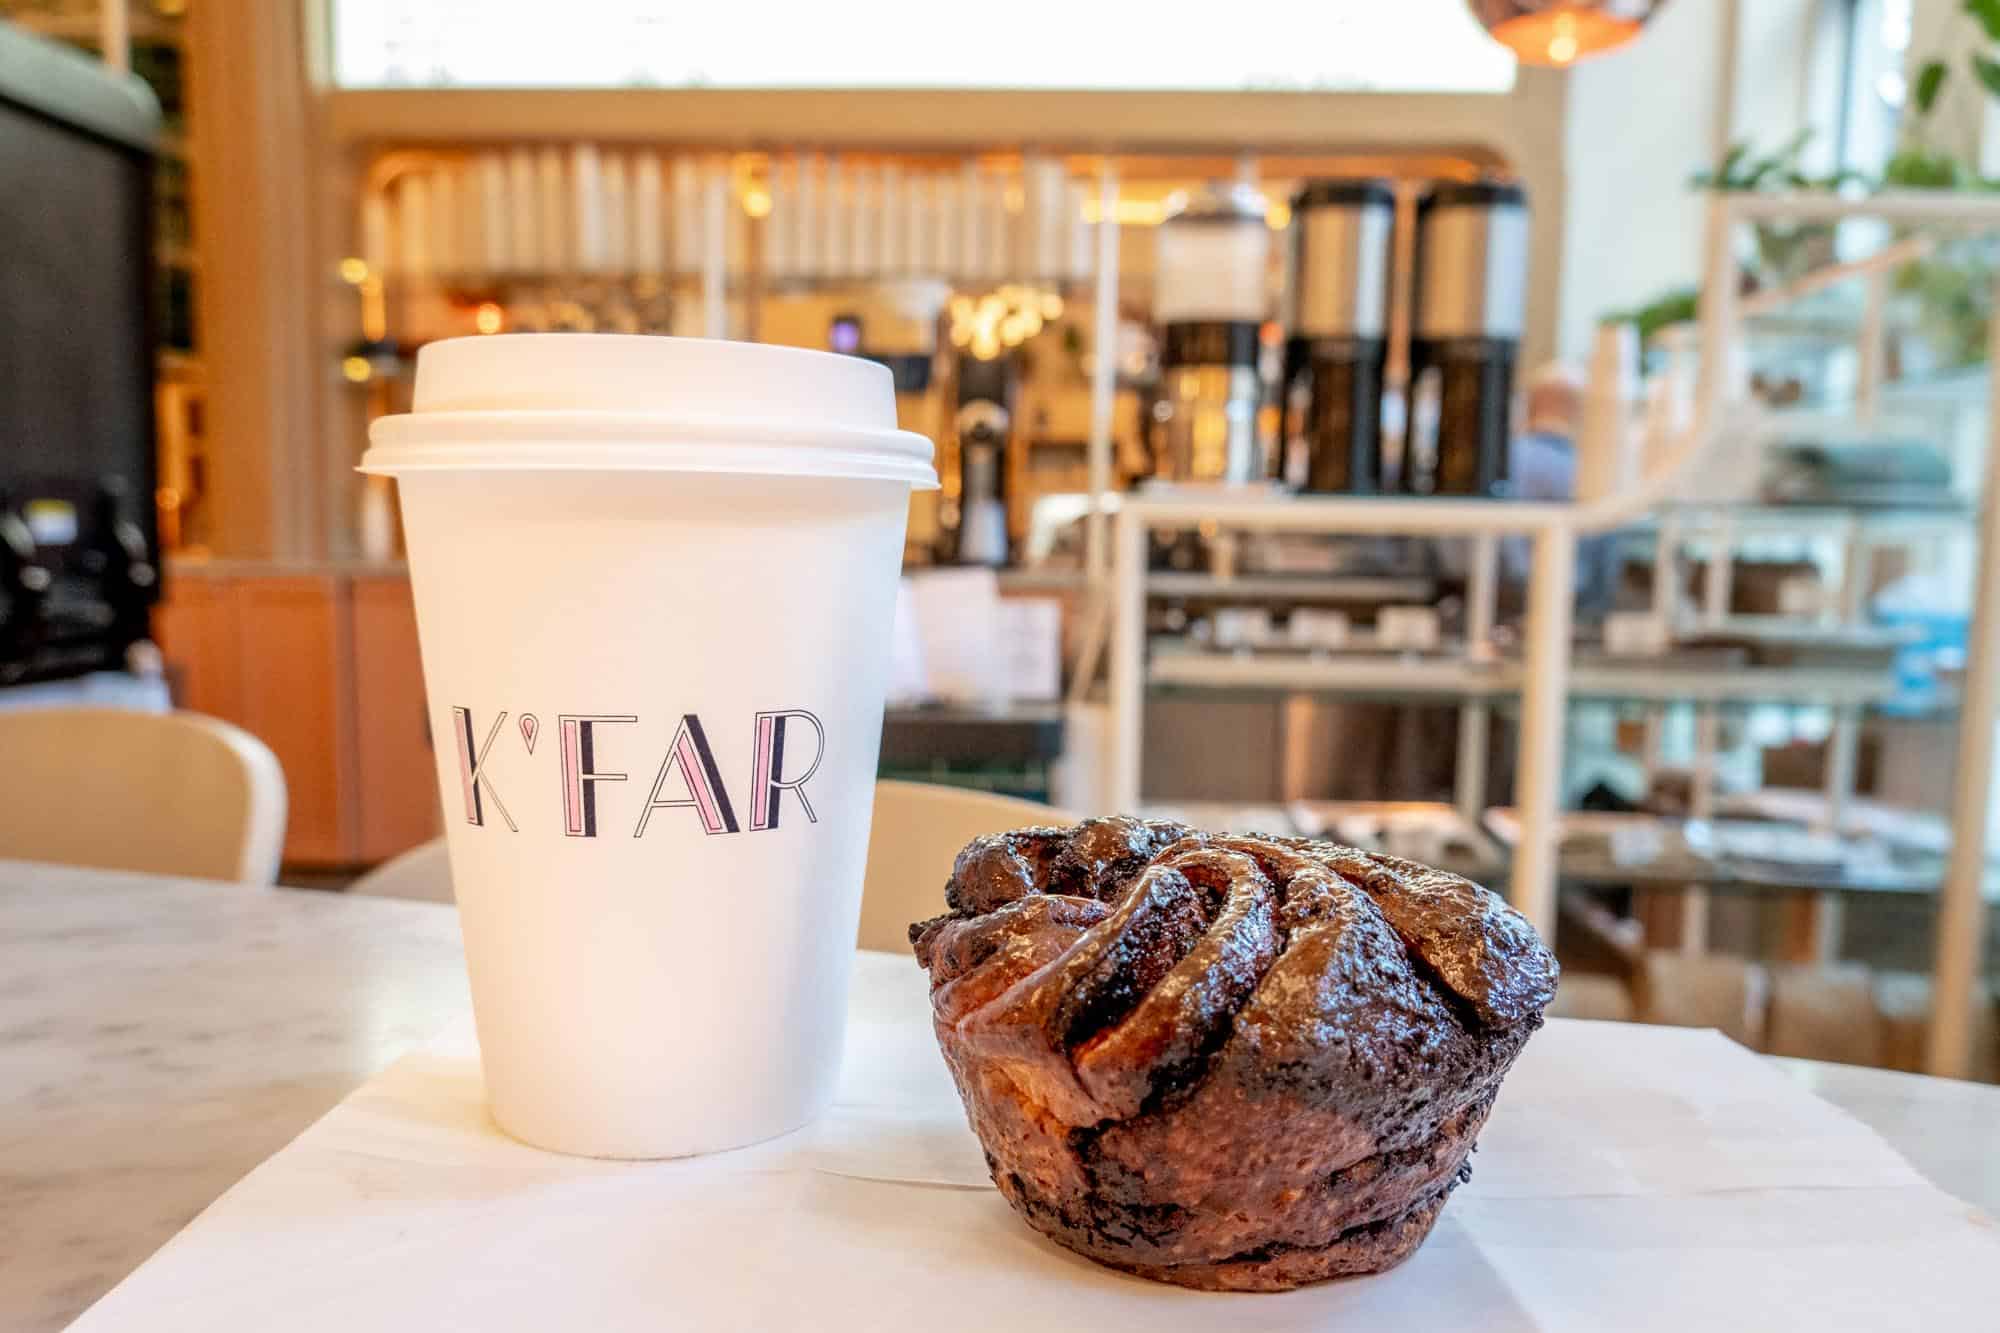 Coffee cup labeled "K'Far" and pastry on the counter in a cafe.